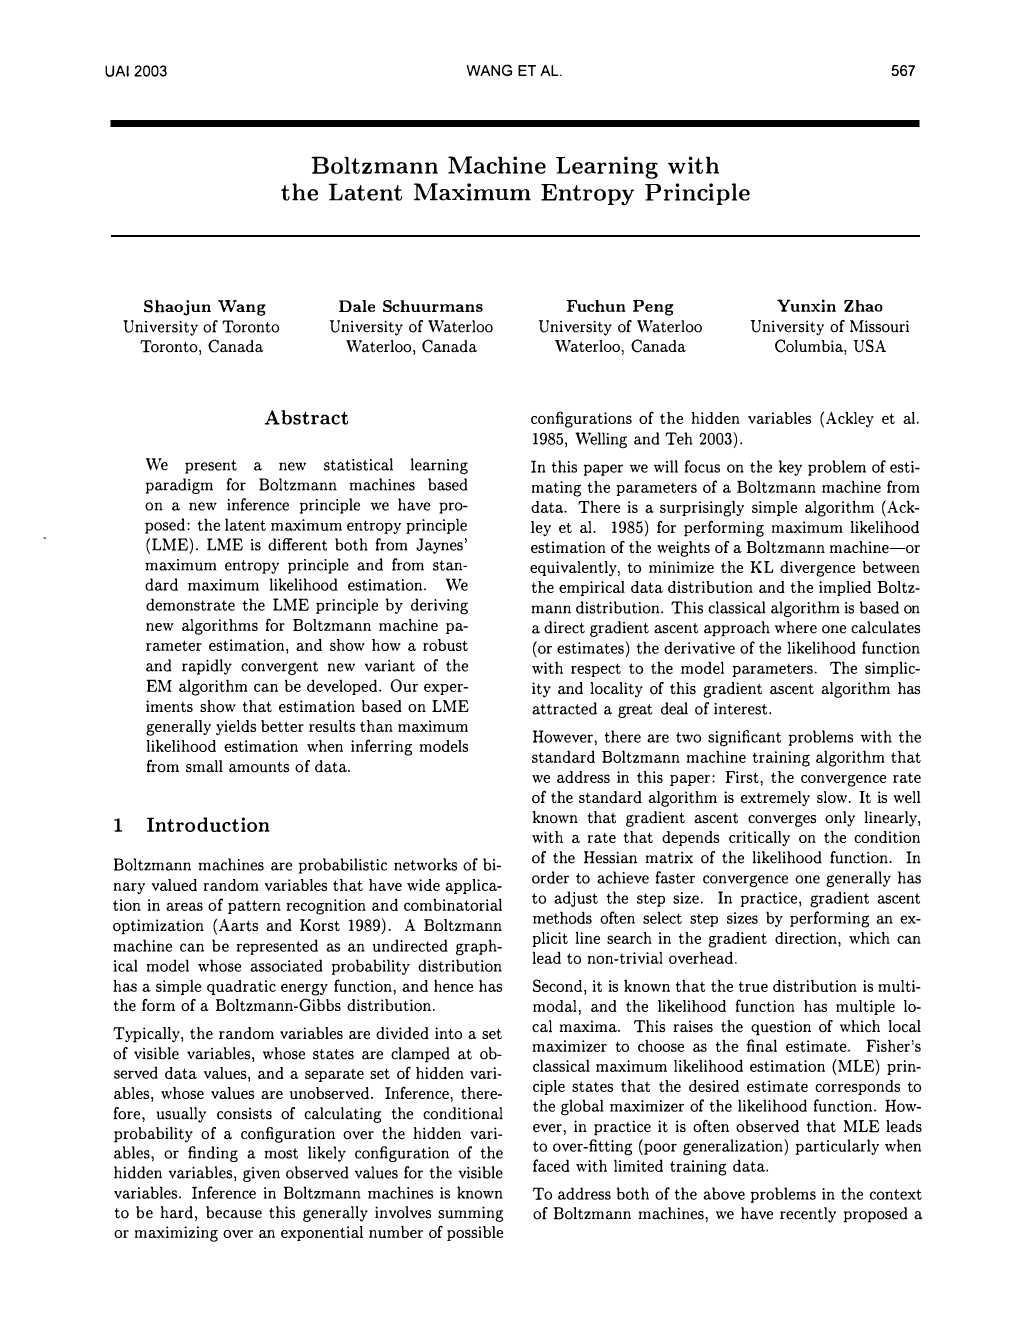 Boltzmann Machine Learning with the Latent Maximum Entropy Principle